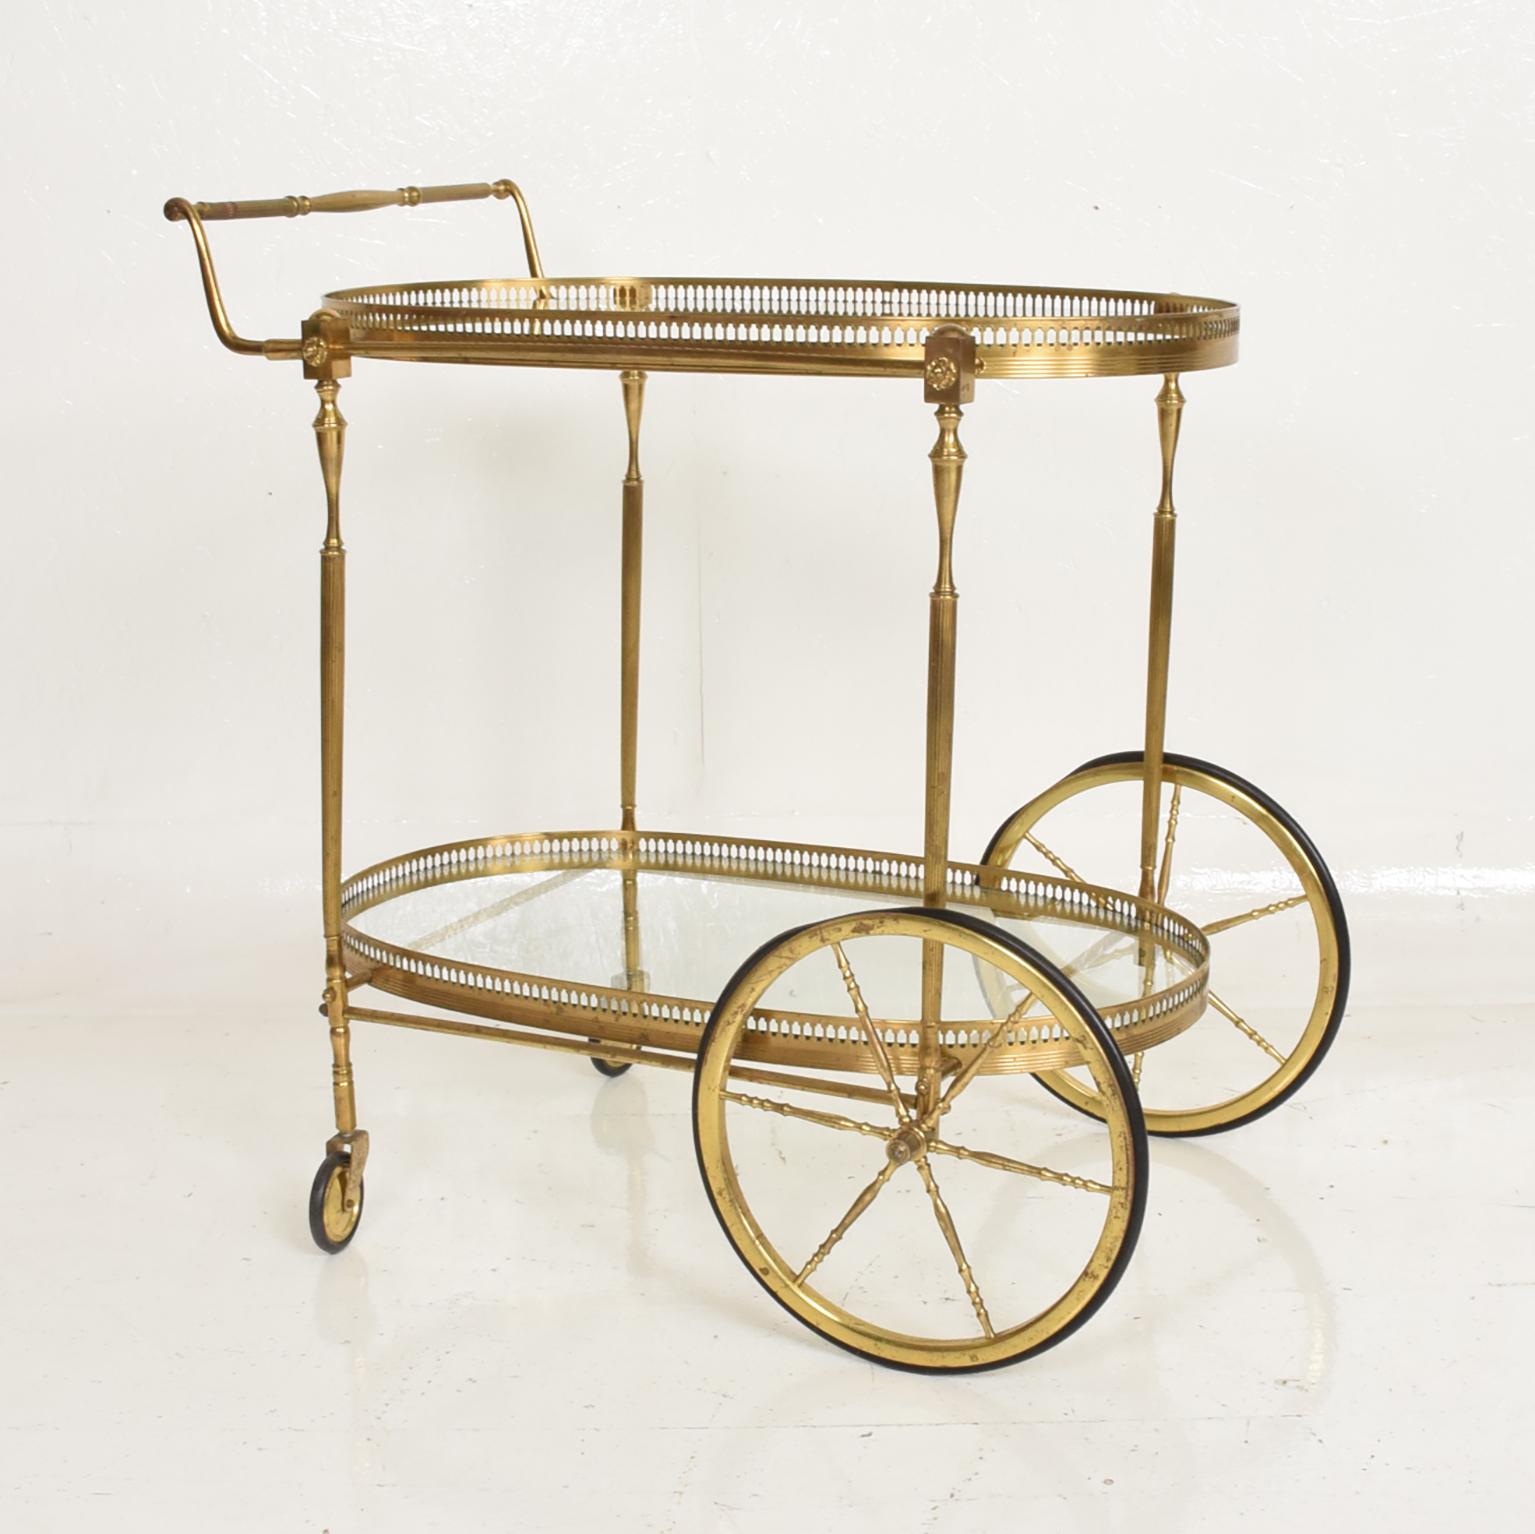 For your consideration, an Italian service cart. Two tiers. Made in brass with rubber wheels. 

Two glass shelves in an oval shape. 

Italy, circa 1960s.

Dimensions: 31